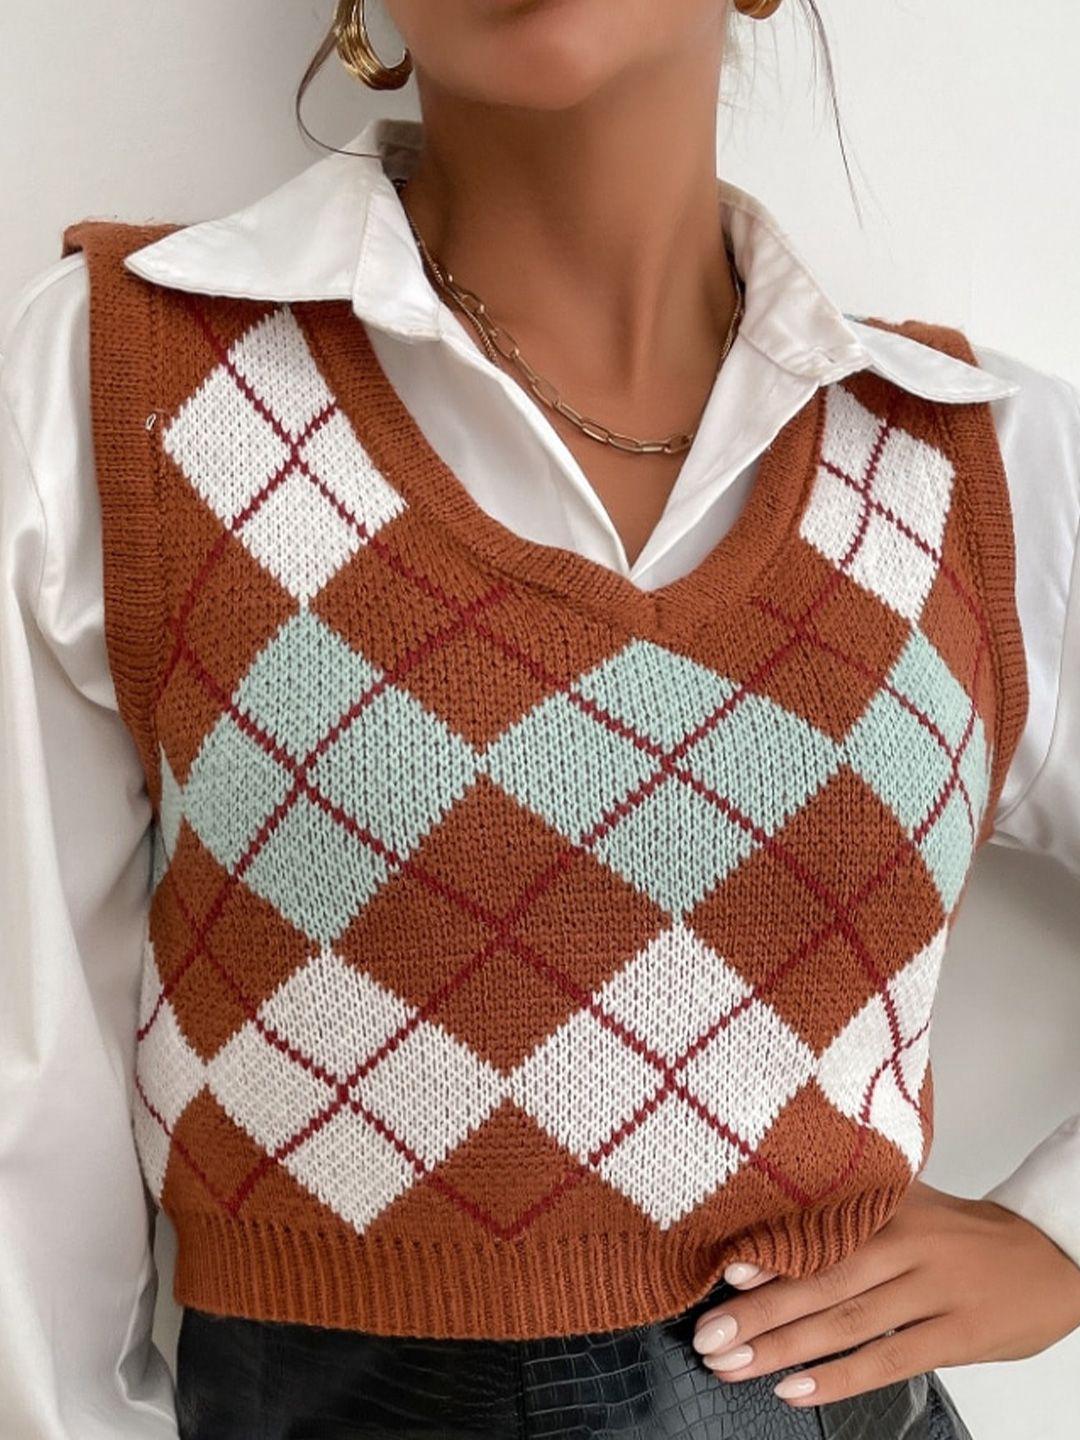 stylecast brown checked crop sweater vest